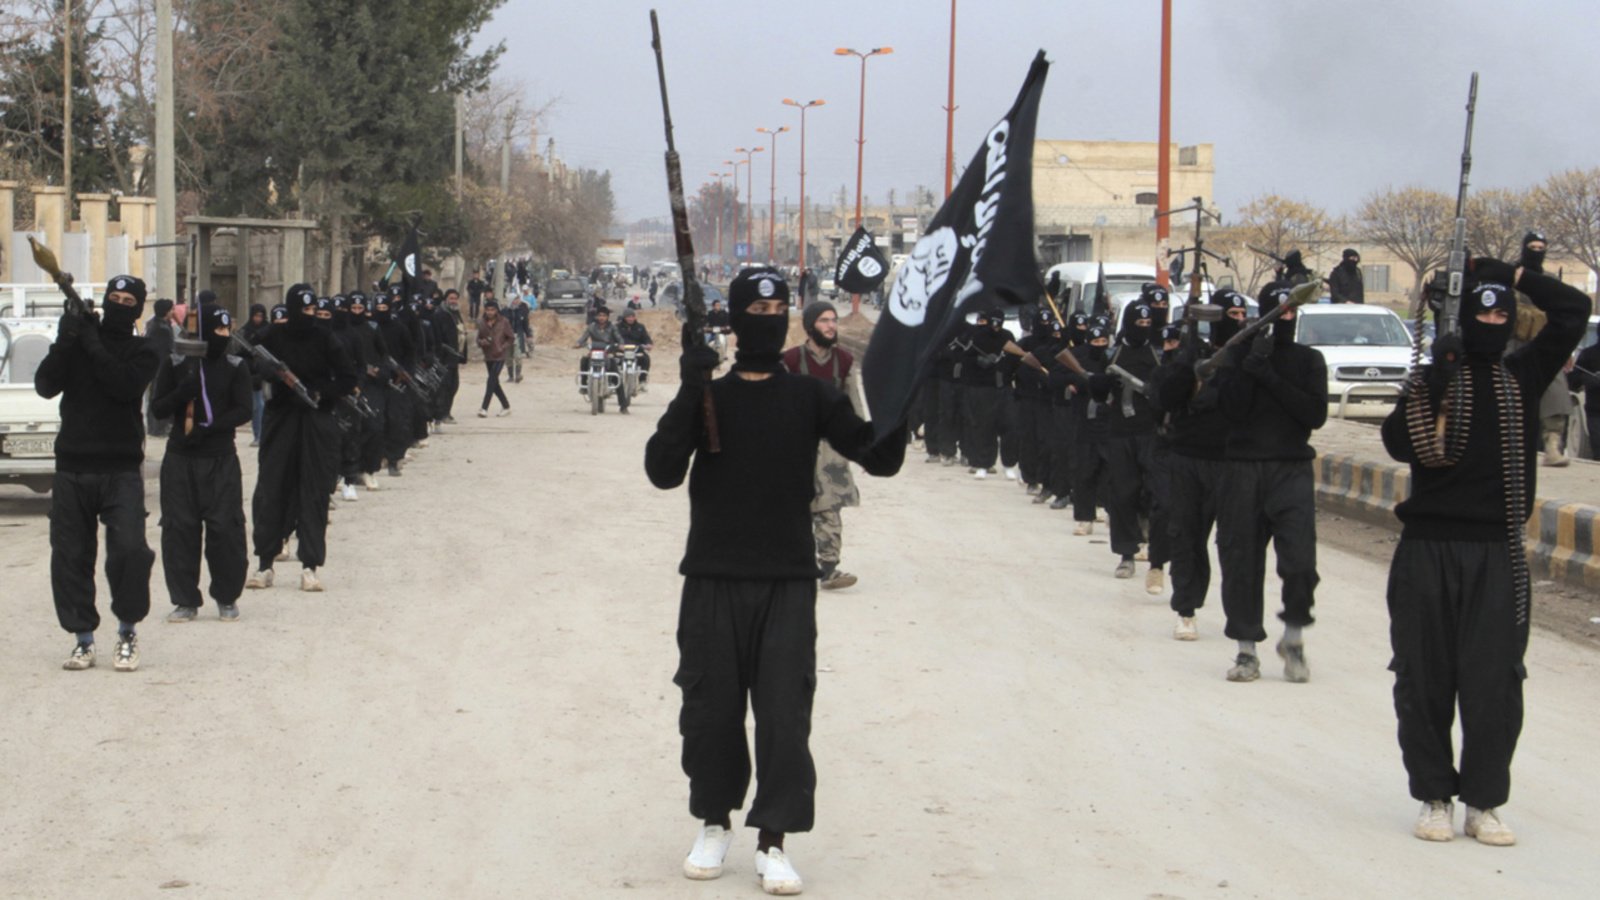 The Islamic State | Council on Foreign Relations